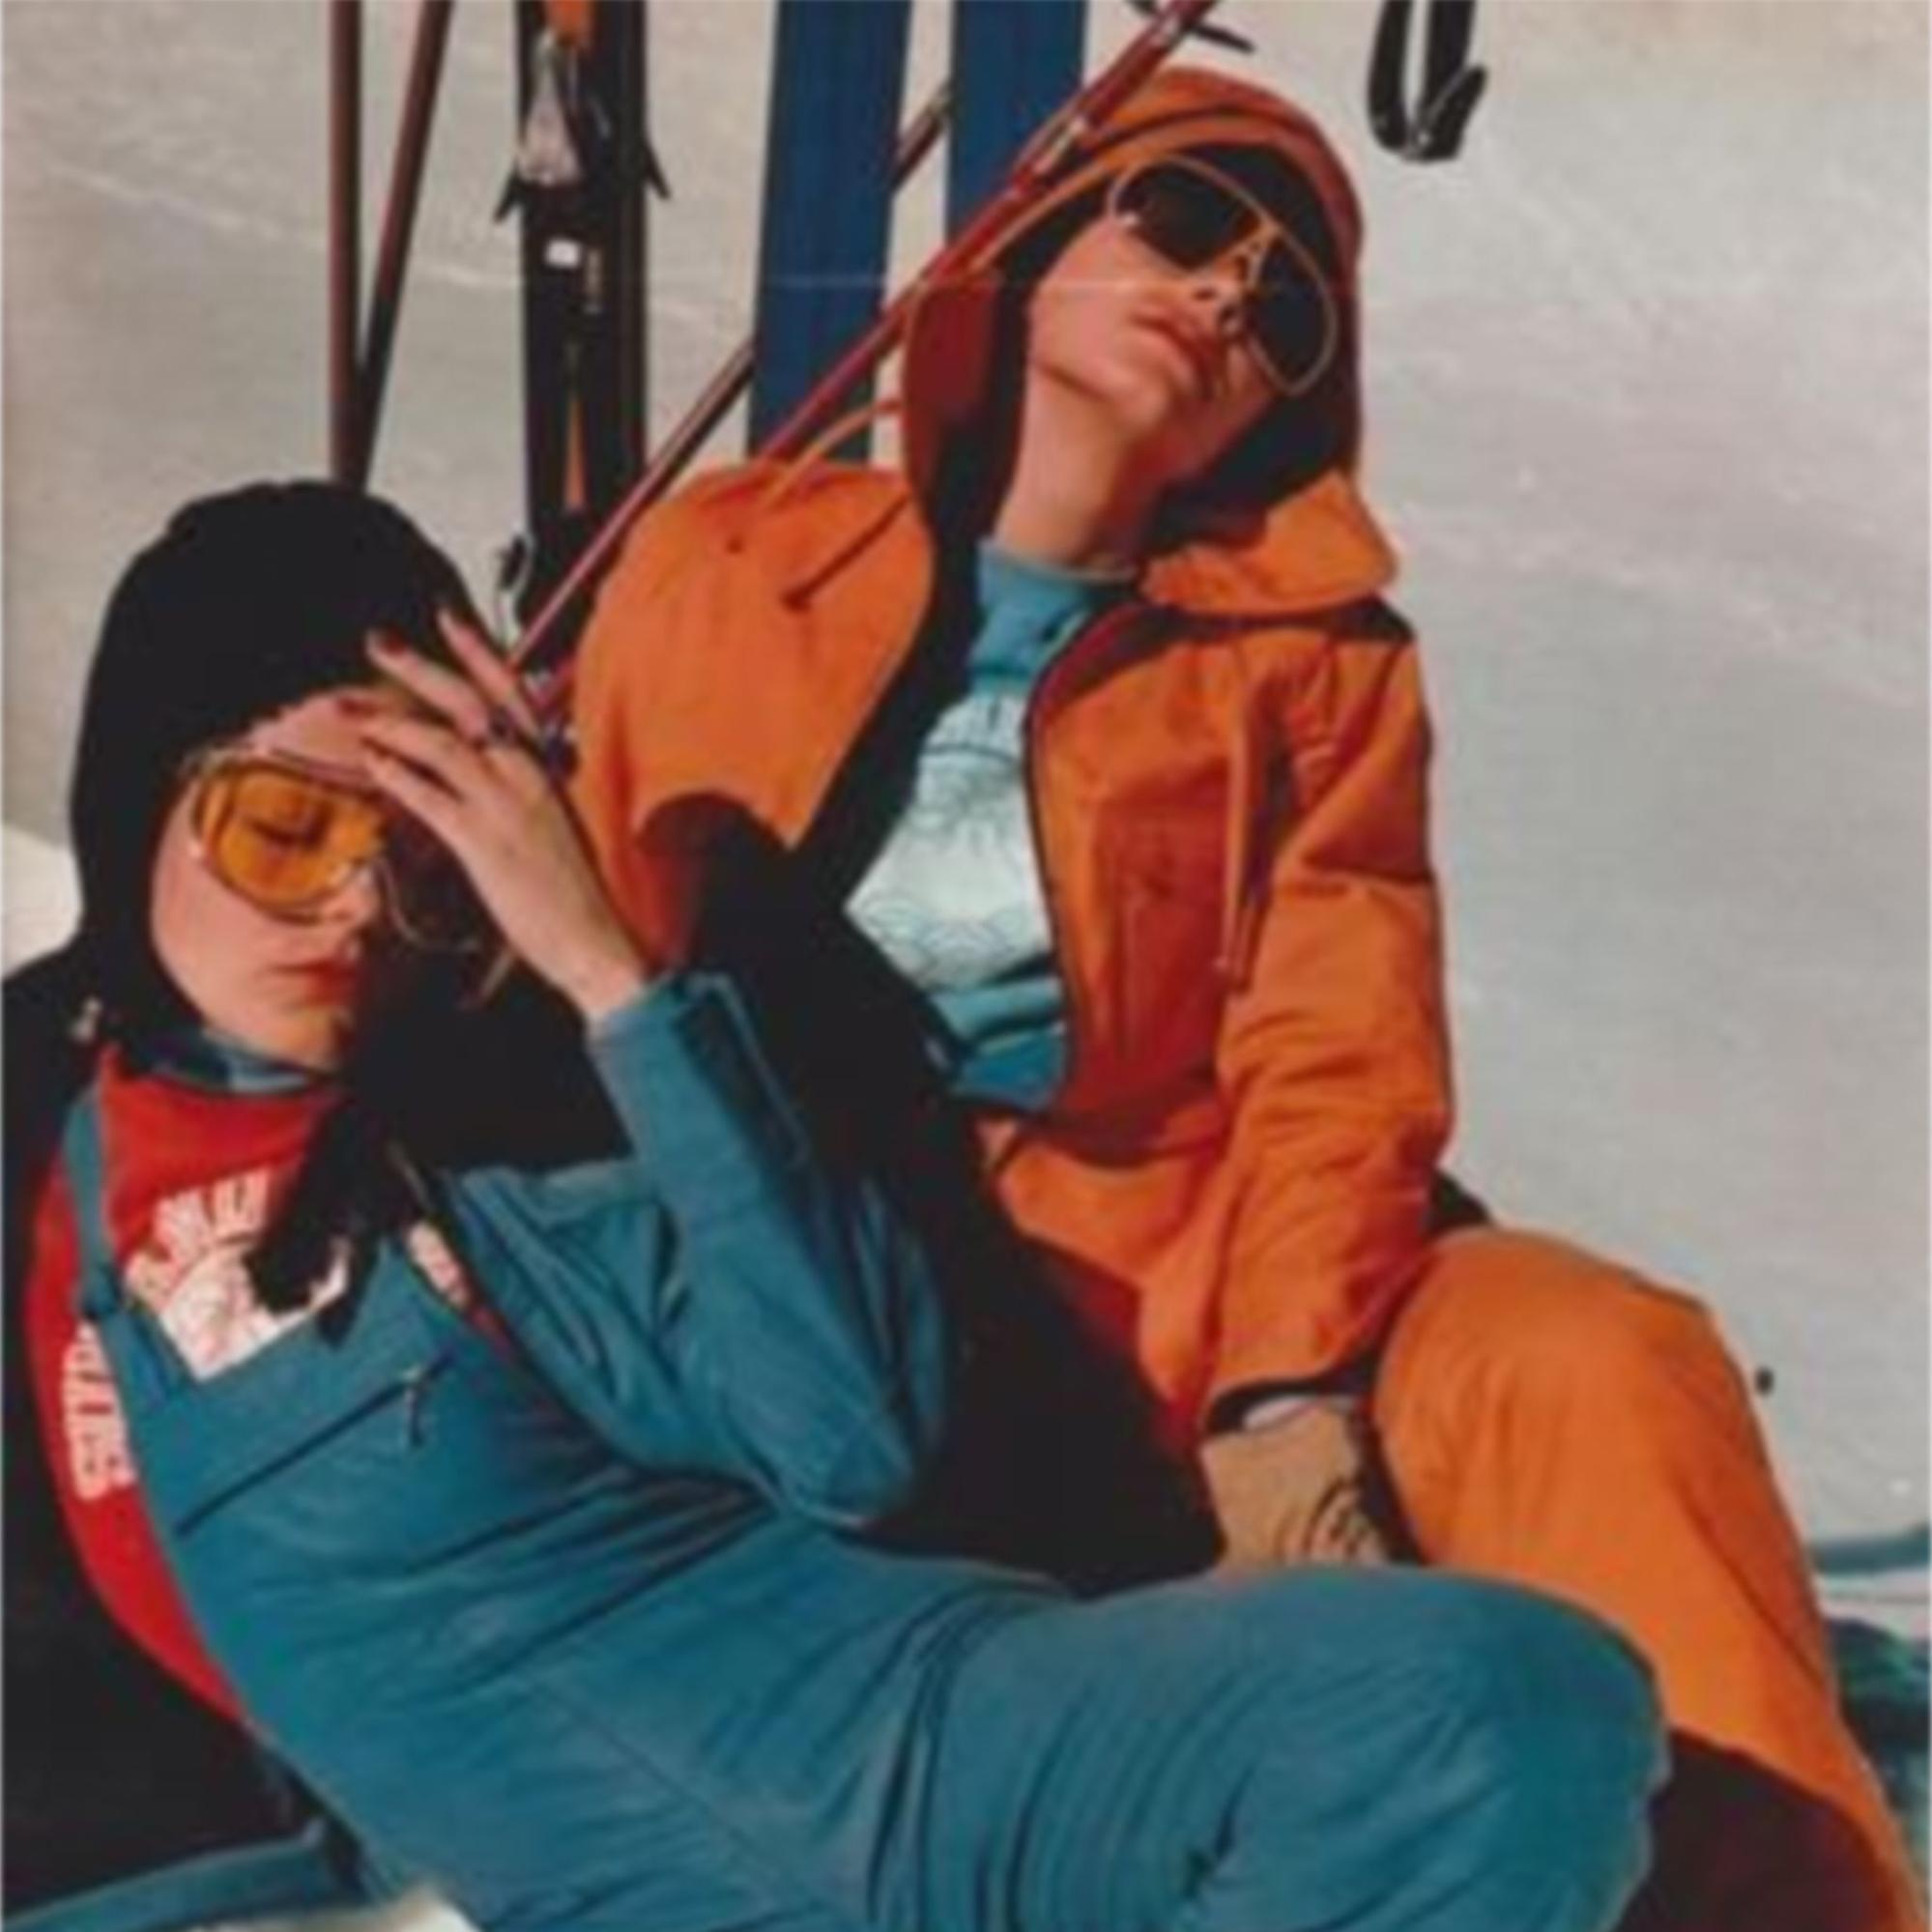 Best Après ski outfits to impress on and off the slopes